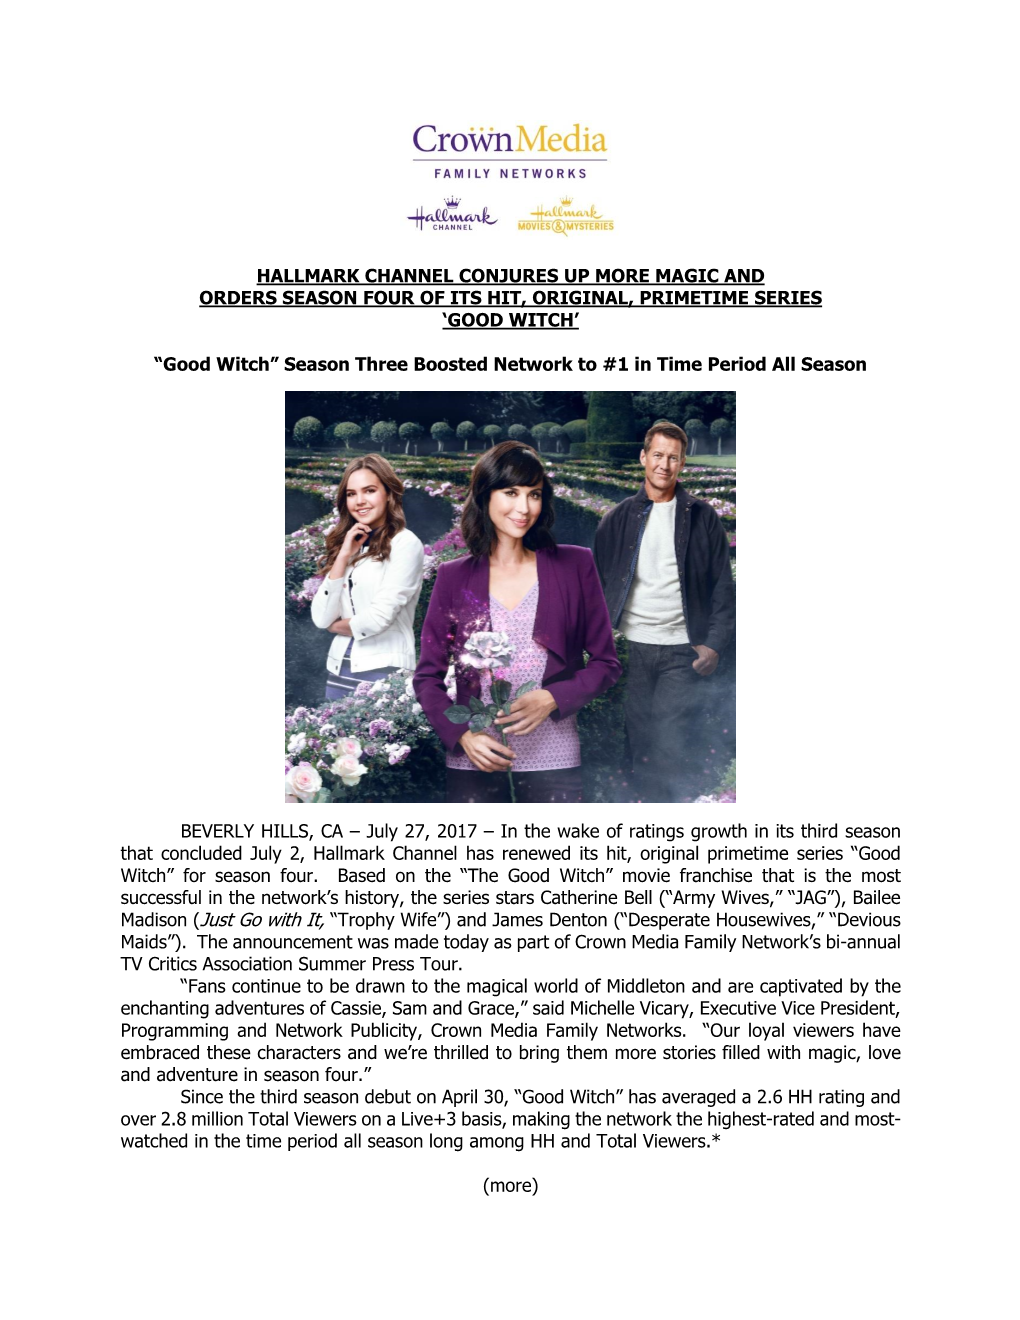 Hallmark Channel Conjures up More Magic and Orders Season Four of Its Hit, Original, Primetime Series ‘Good Witch’